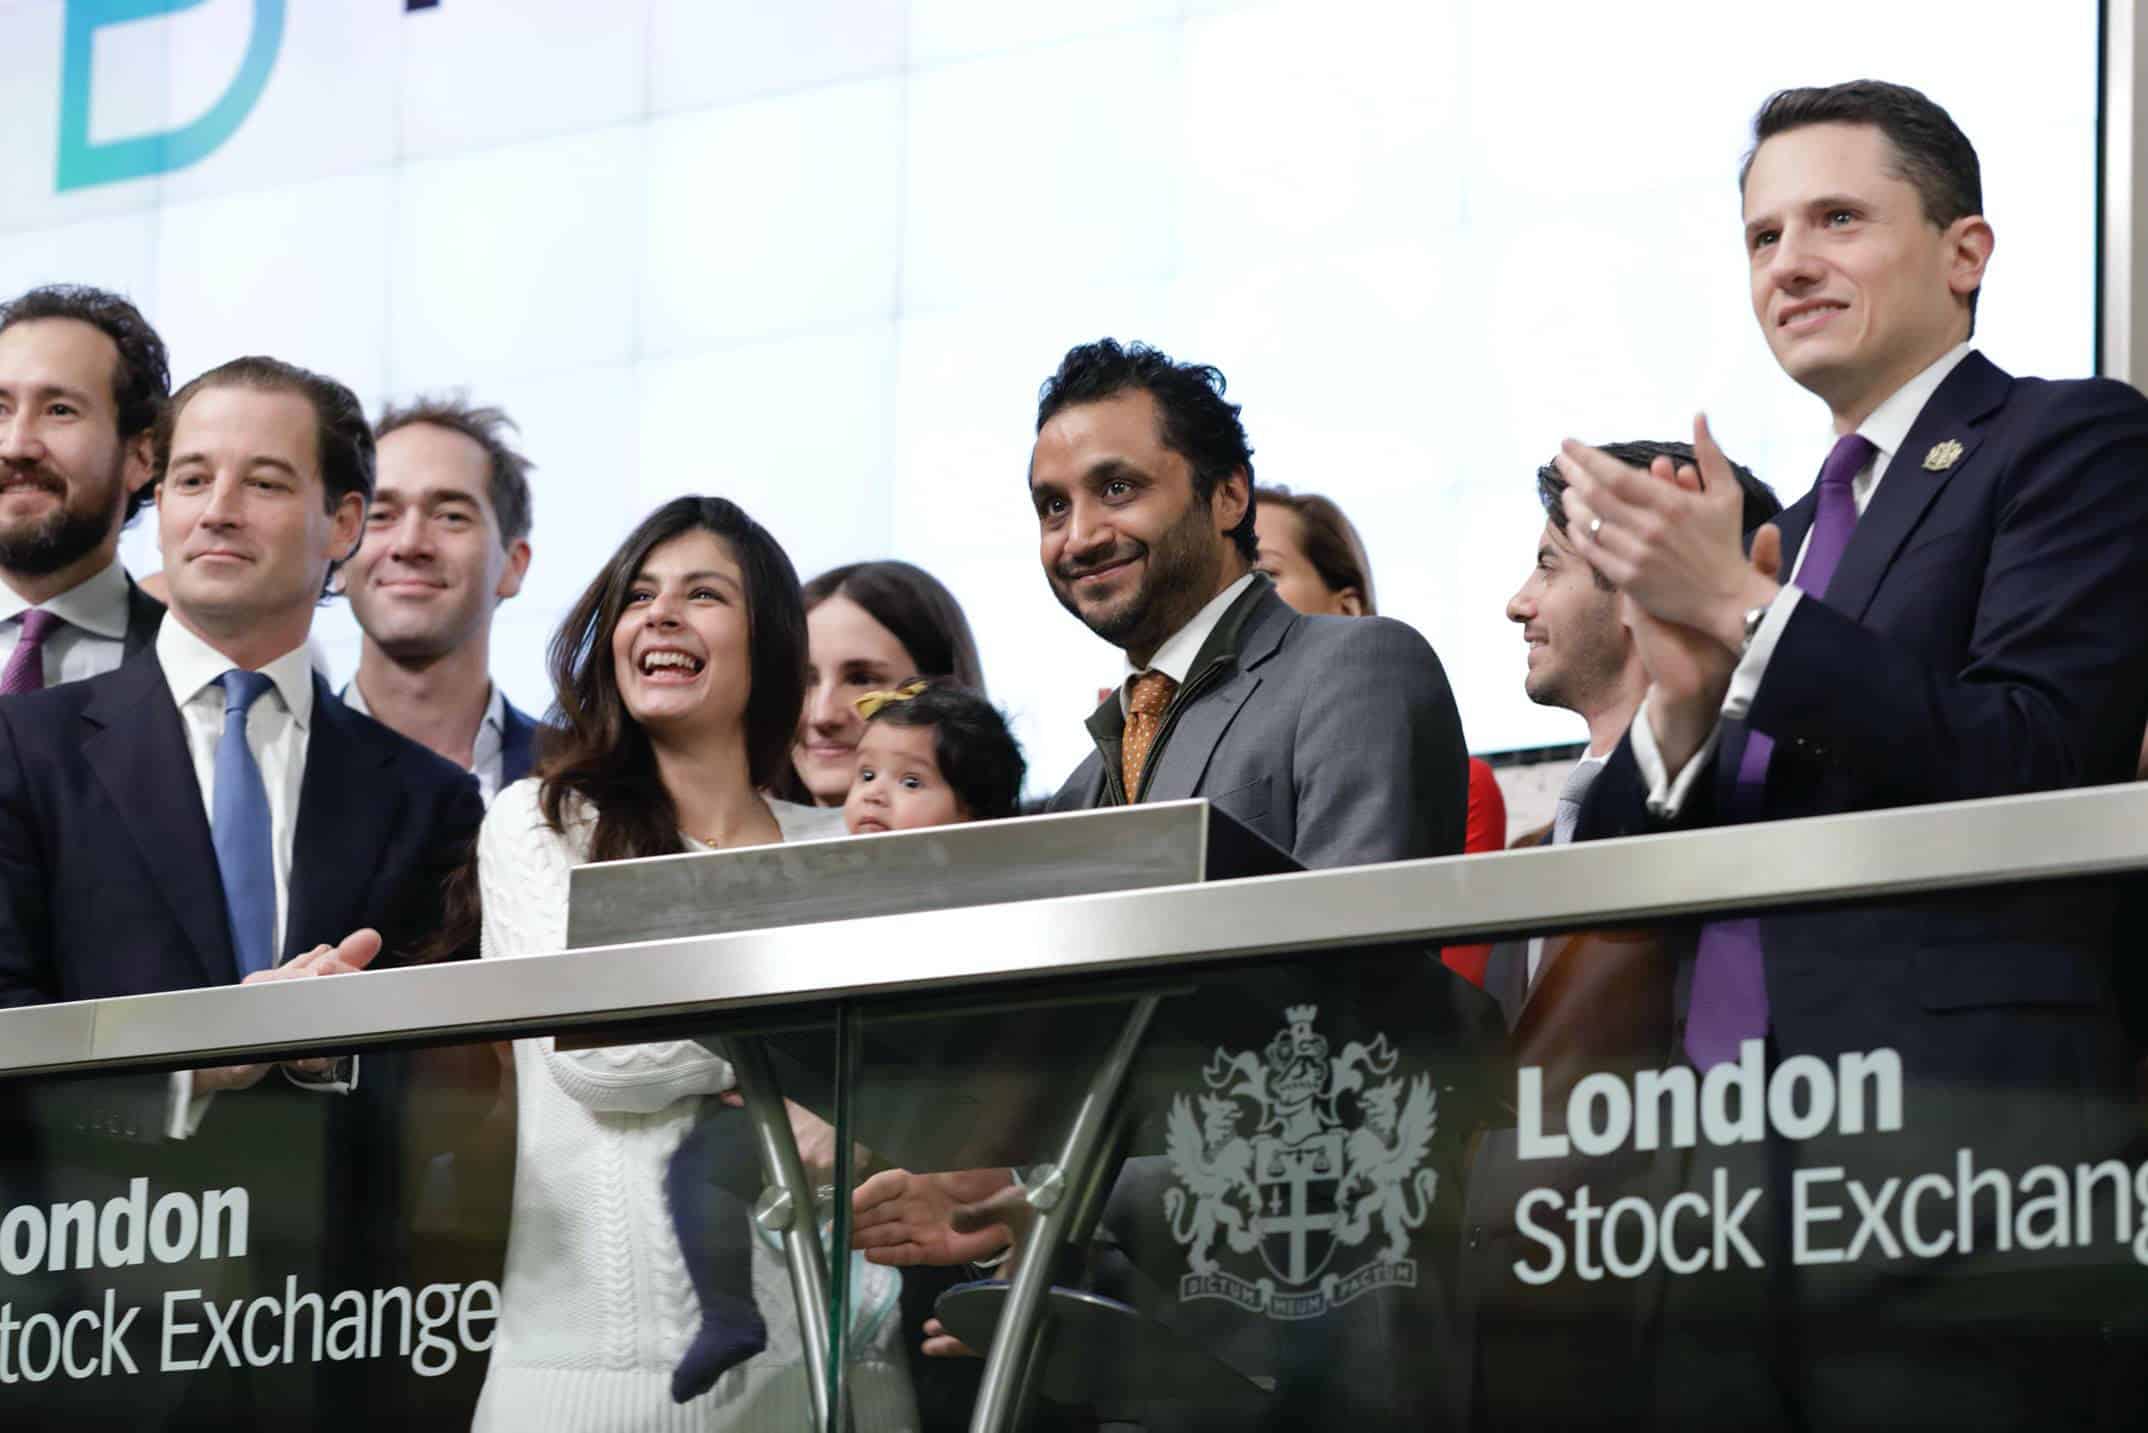 PrimaryBid secures £38.4 million Series B investment from London Stock Exchange